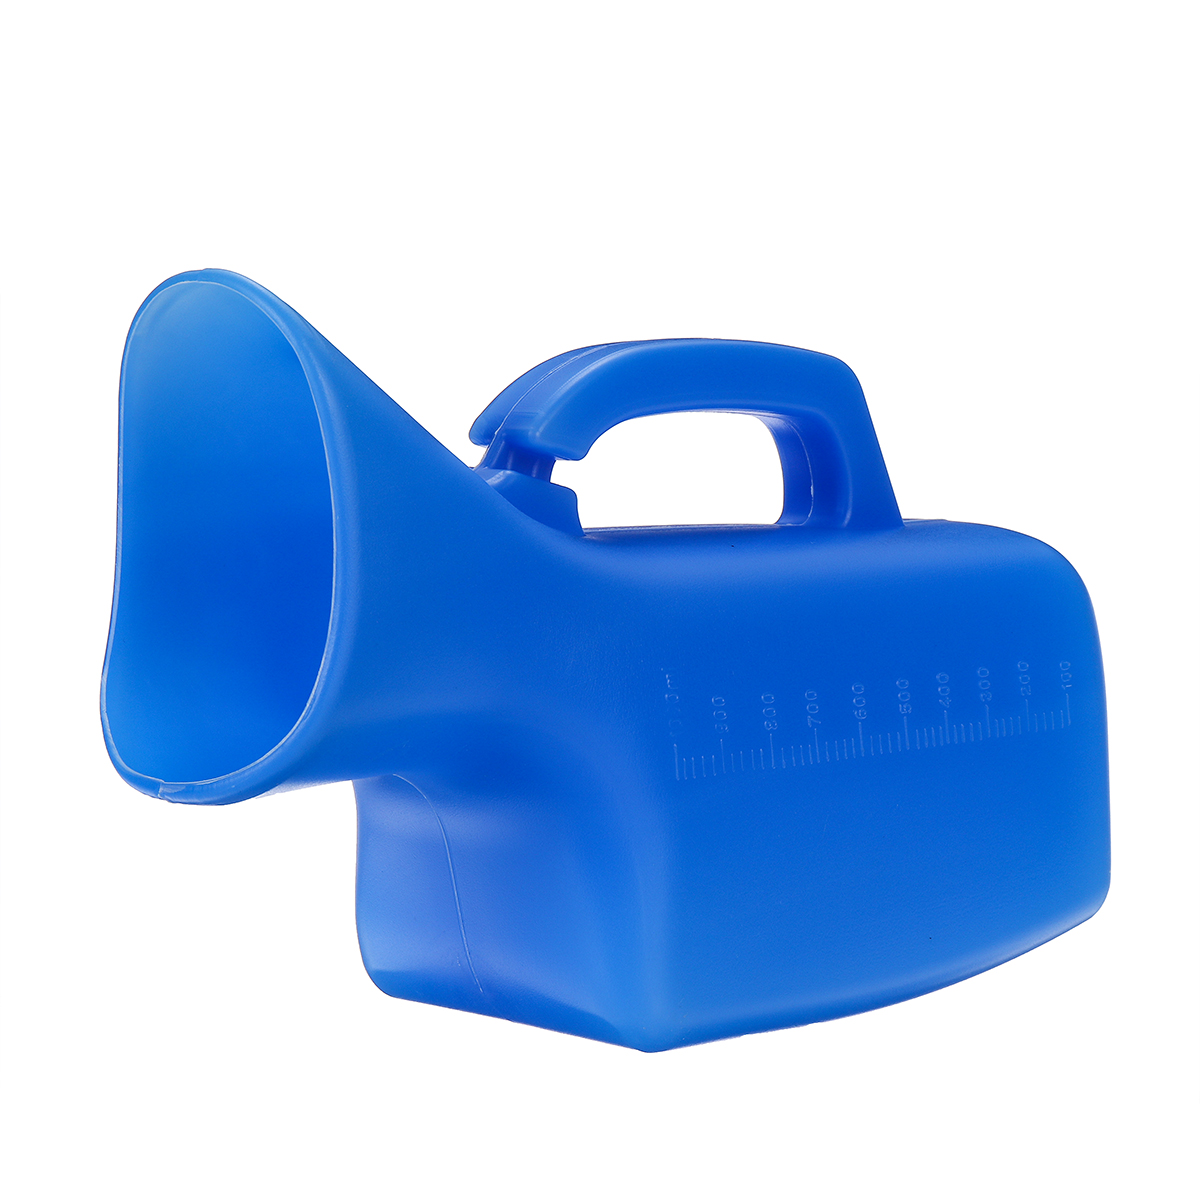 1200ML-Portable-Urinal-Handheld-Urinal-Thickened-Plastic-Urinal-Outdoor-Medical-Men-And-Women-Availa-1857146-14